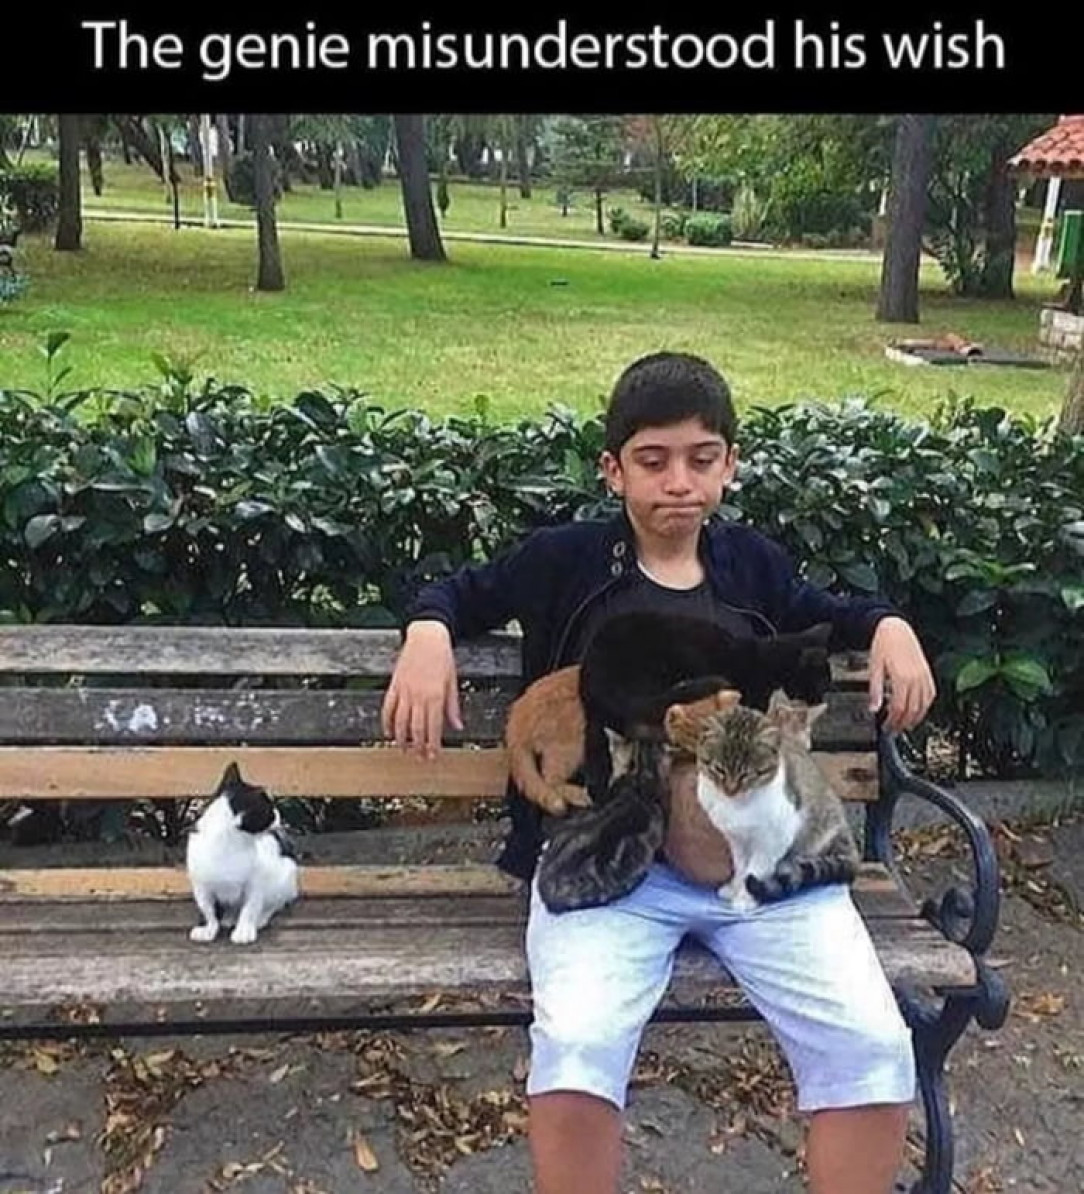 That was not the pussy that he wanted